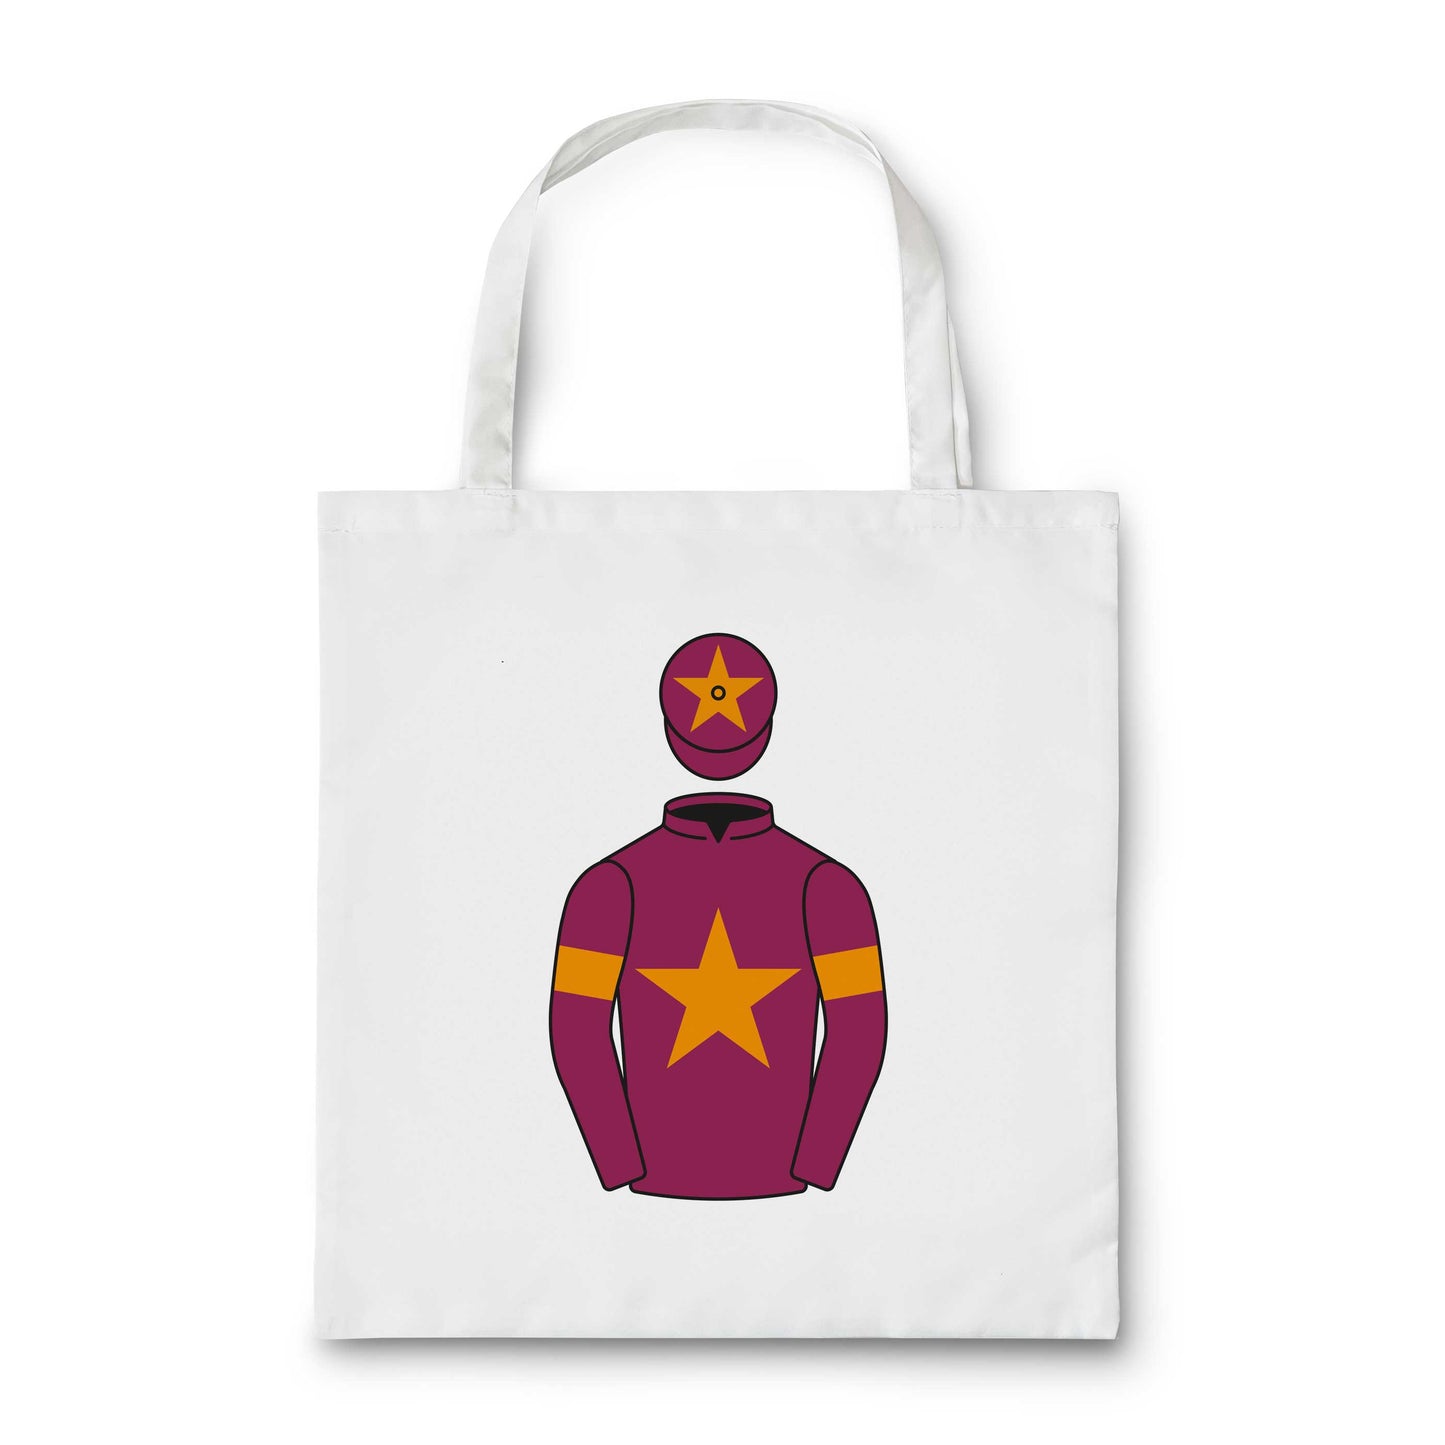 National Hunt Racing Enthusiasts Tote Bag - Tote Bag - Hacked Up